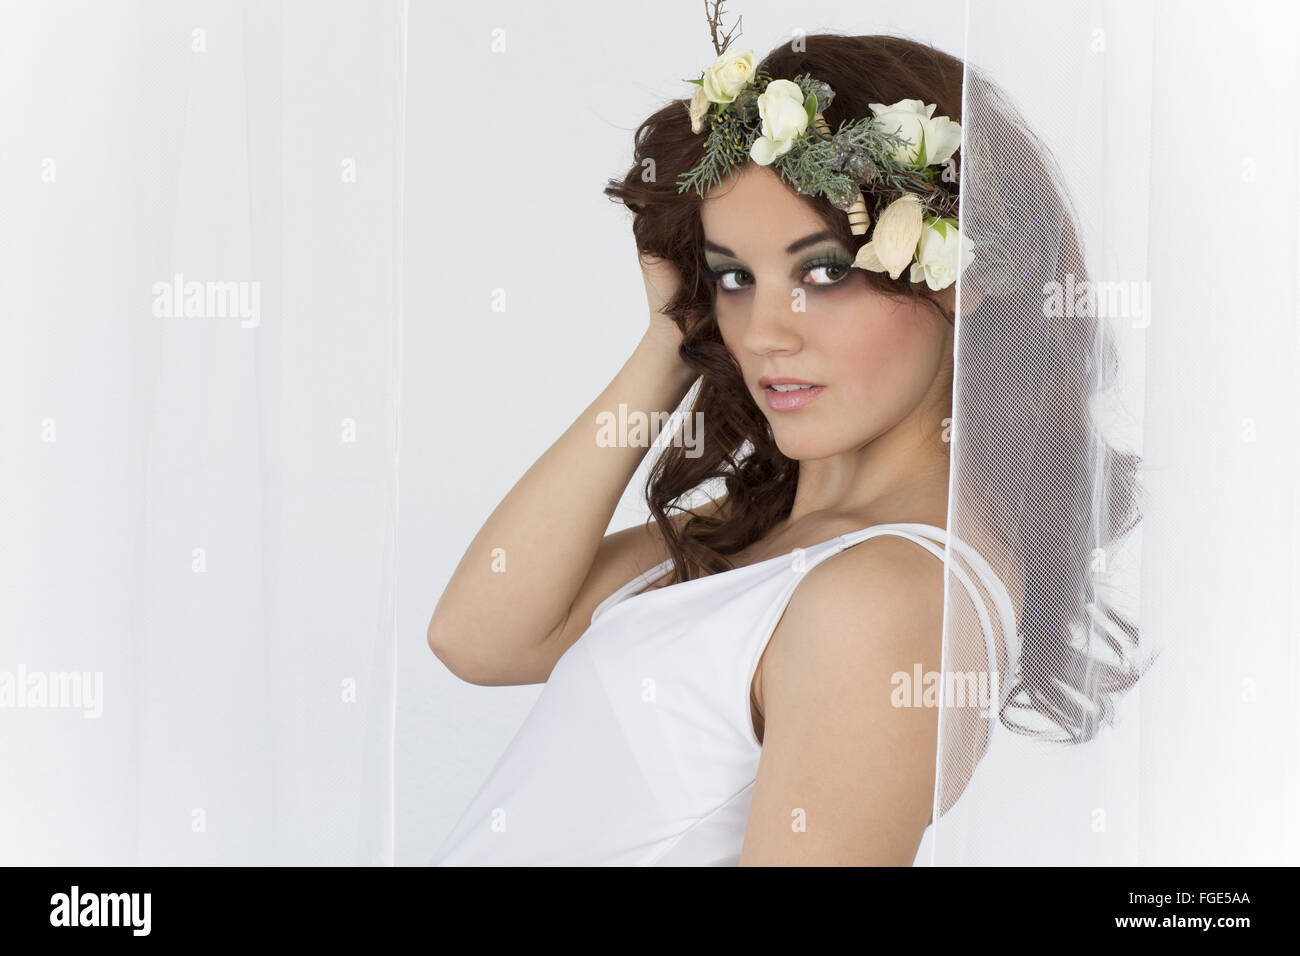 Young woman with flower arrangement as a headdress Stock Photo